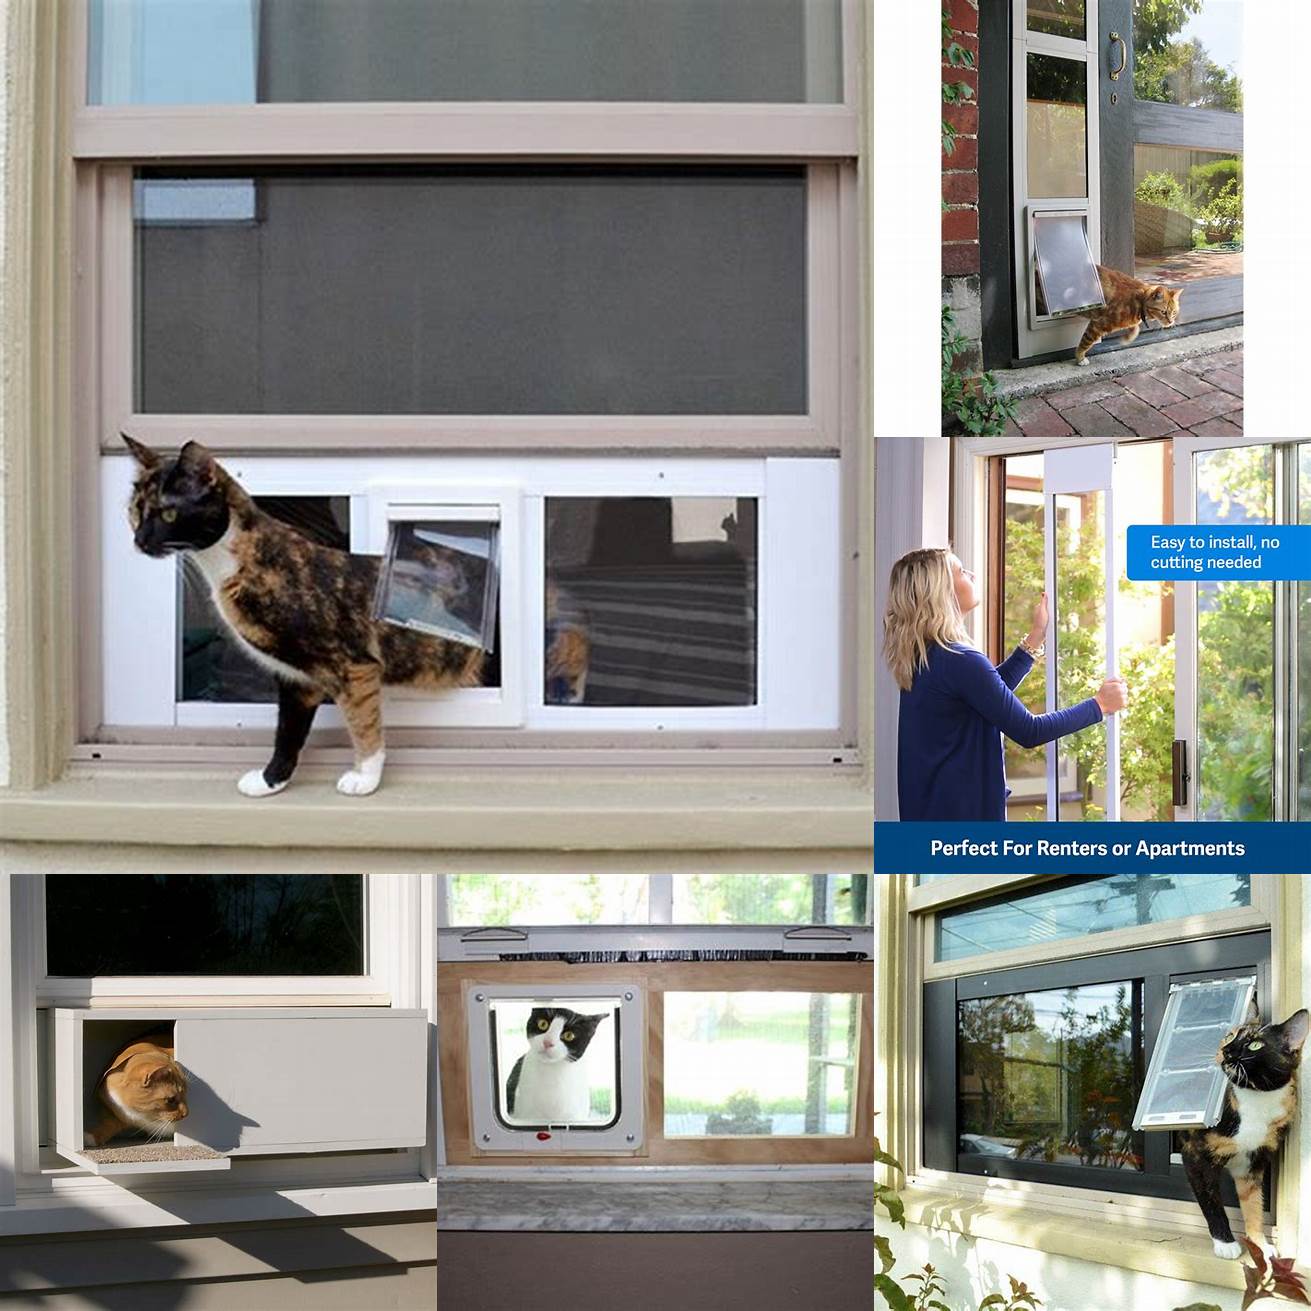 Affordability Cat doors for sliding windows are affordable